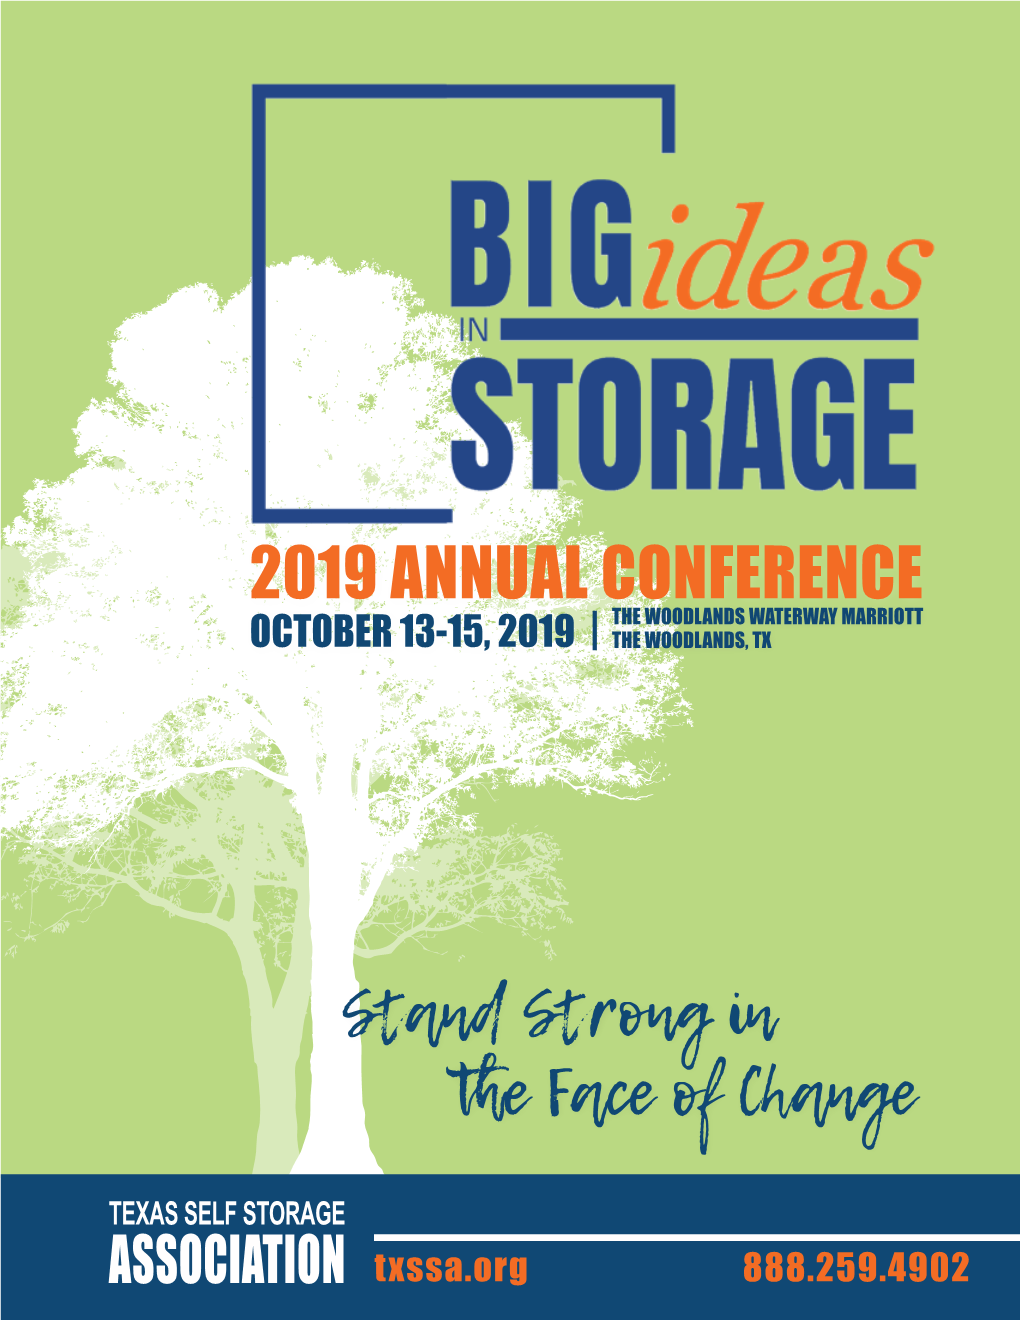 2019 Annual Conference the Woodlands Waterway Marriott October 13-15, 2019 | the Woodlands, Tx